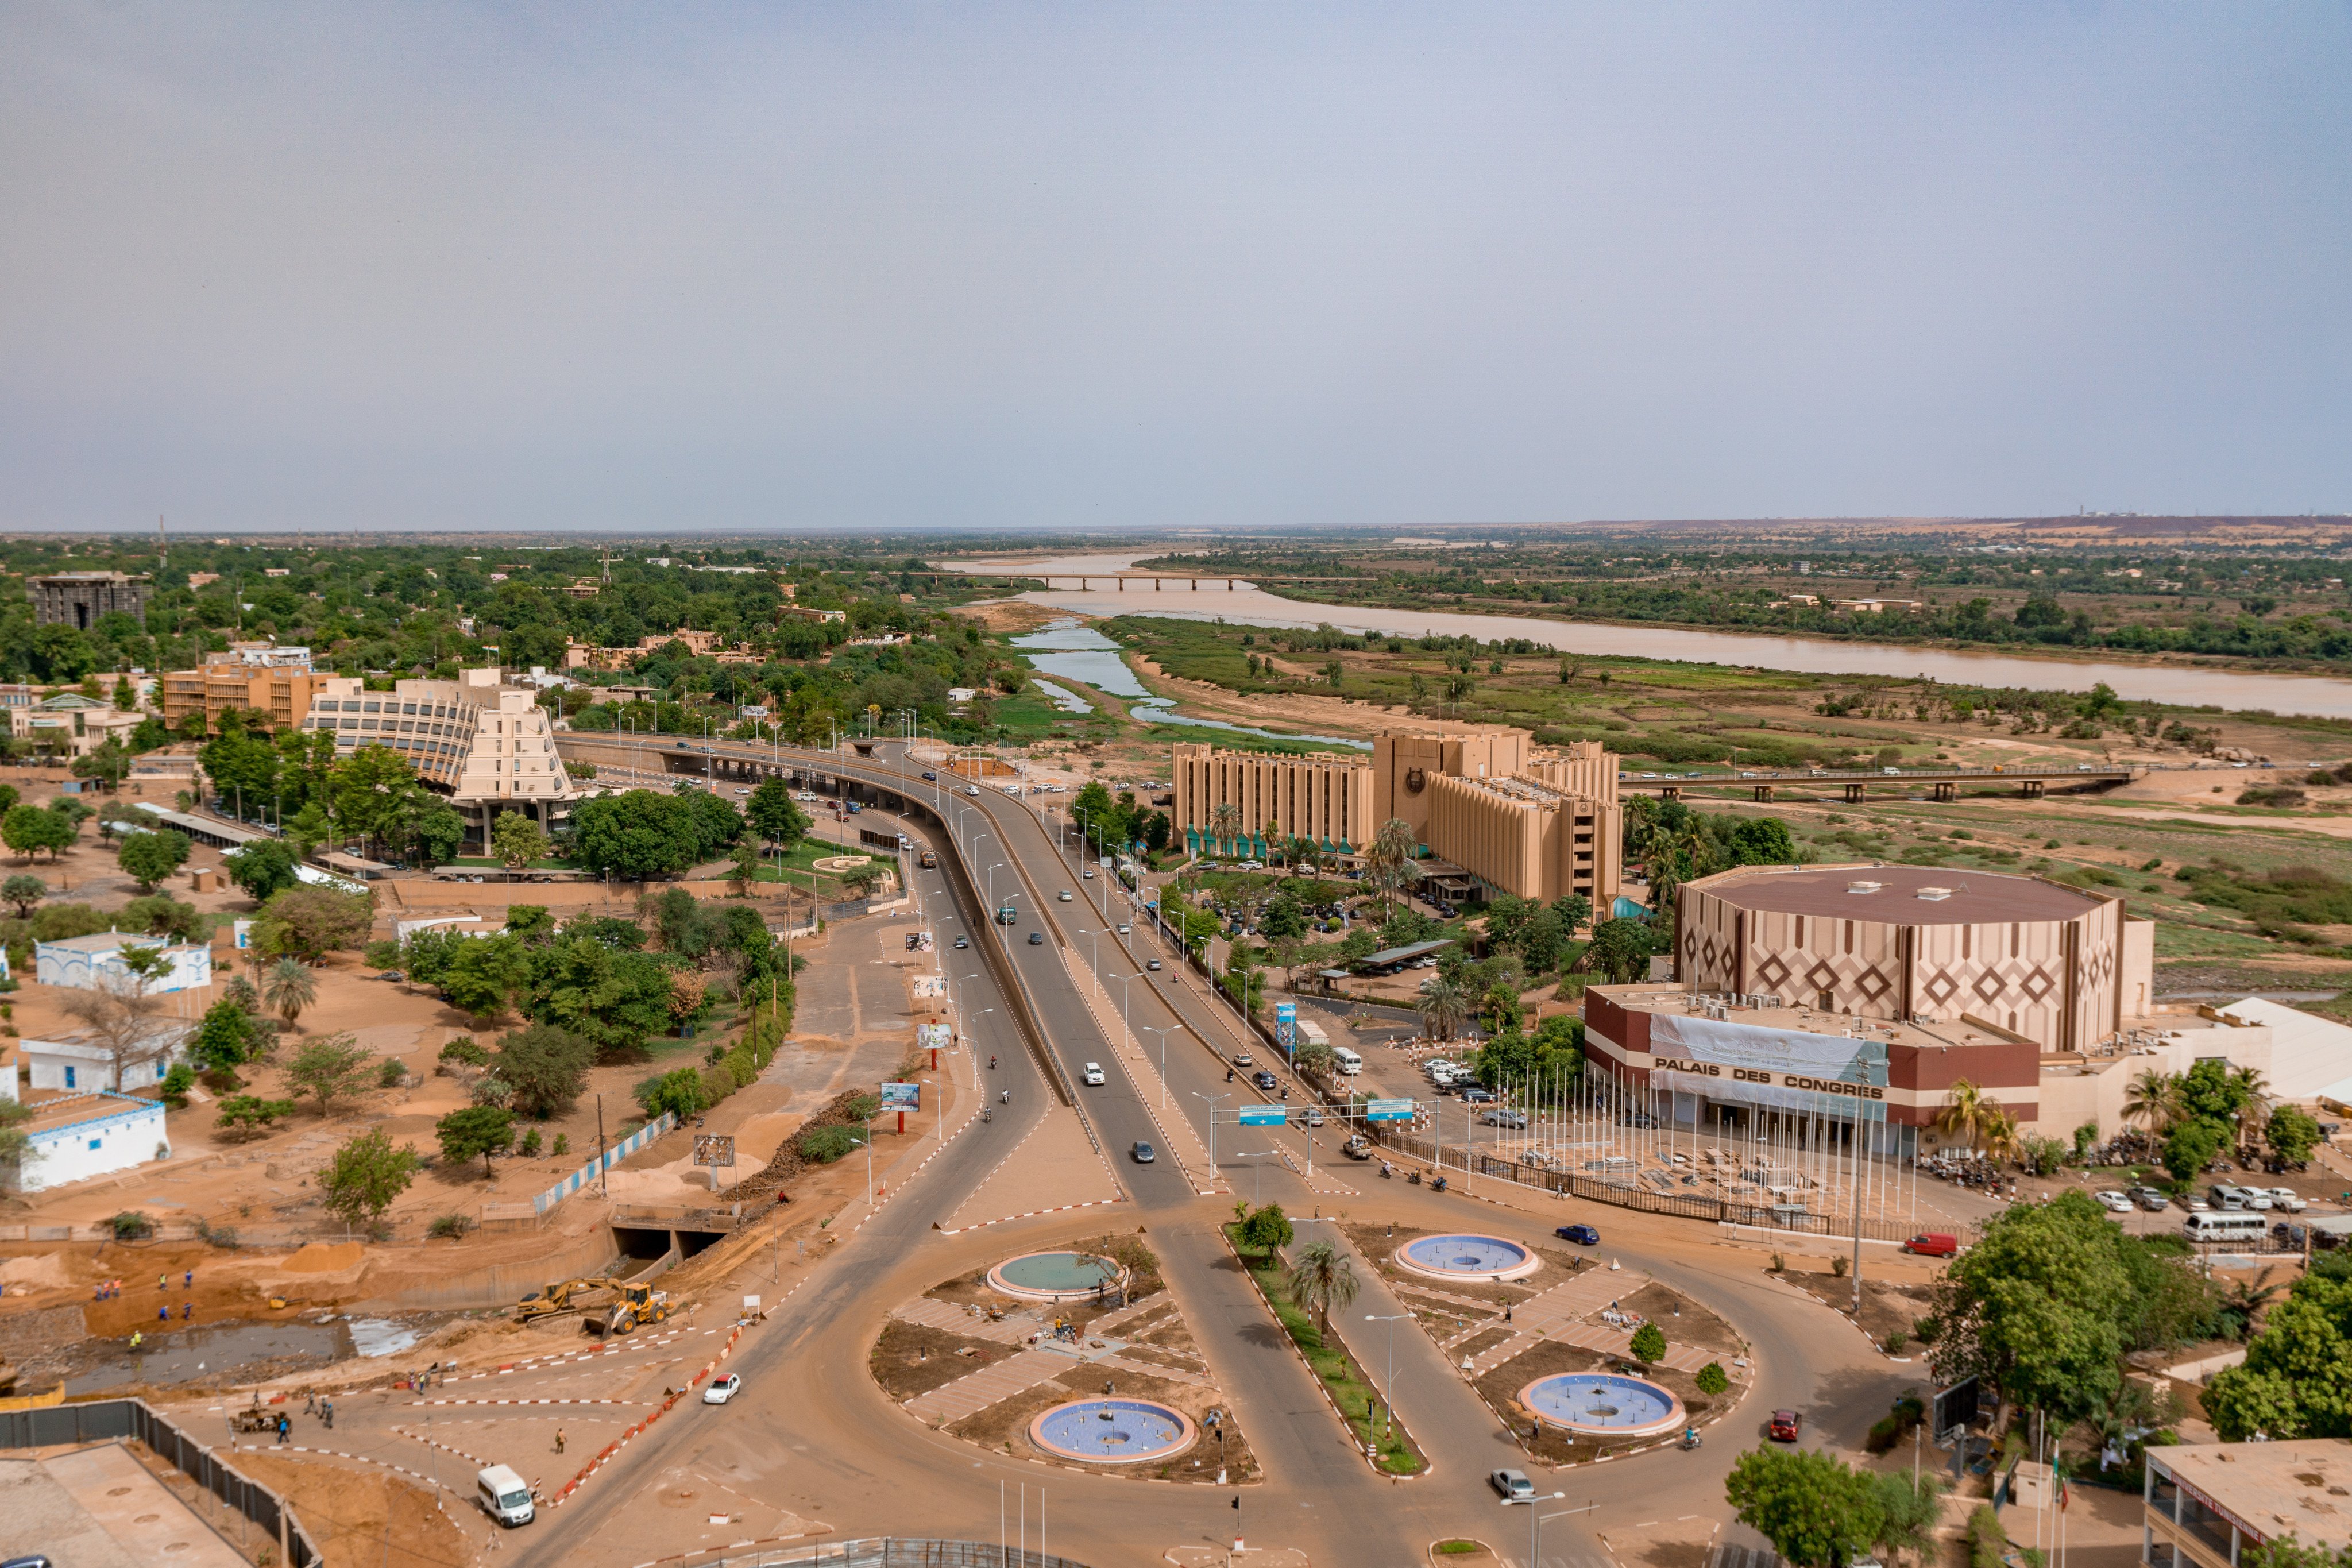 Niamey in Niger has hosted several meetings with Chinese officials in the last two weeks after 1,000 US troops were ordered to leave the West African nation by the ruling military junta. Photo: Shutterstock